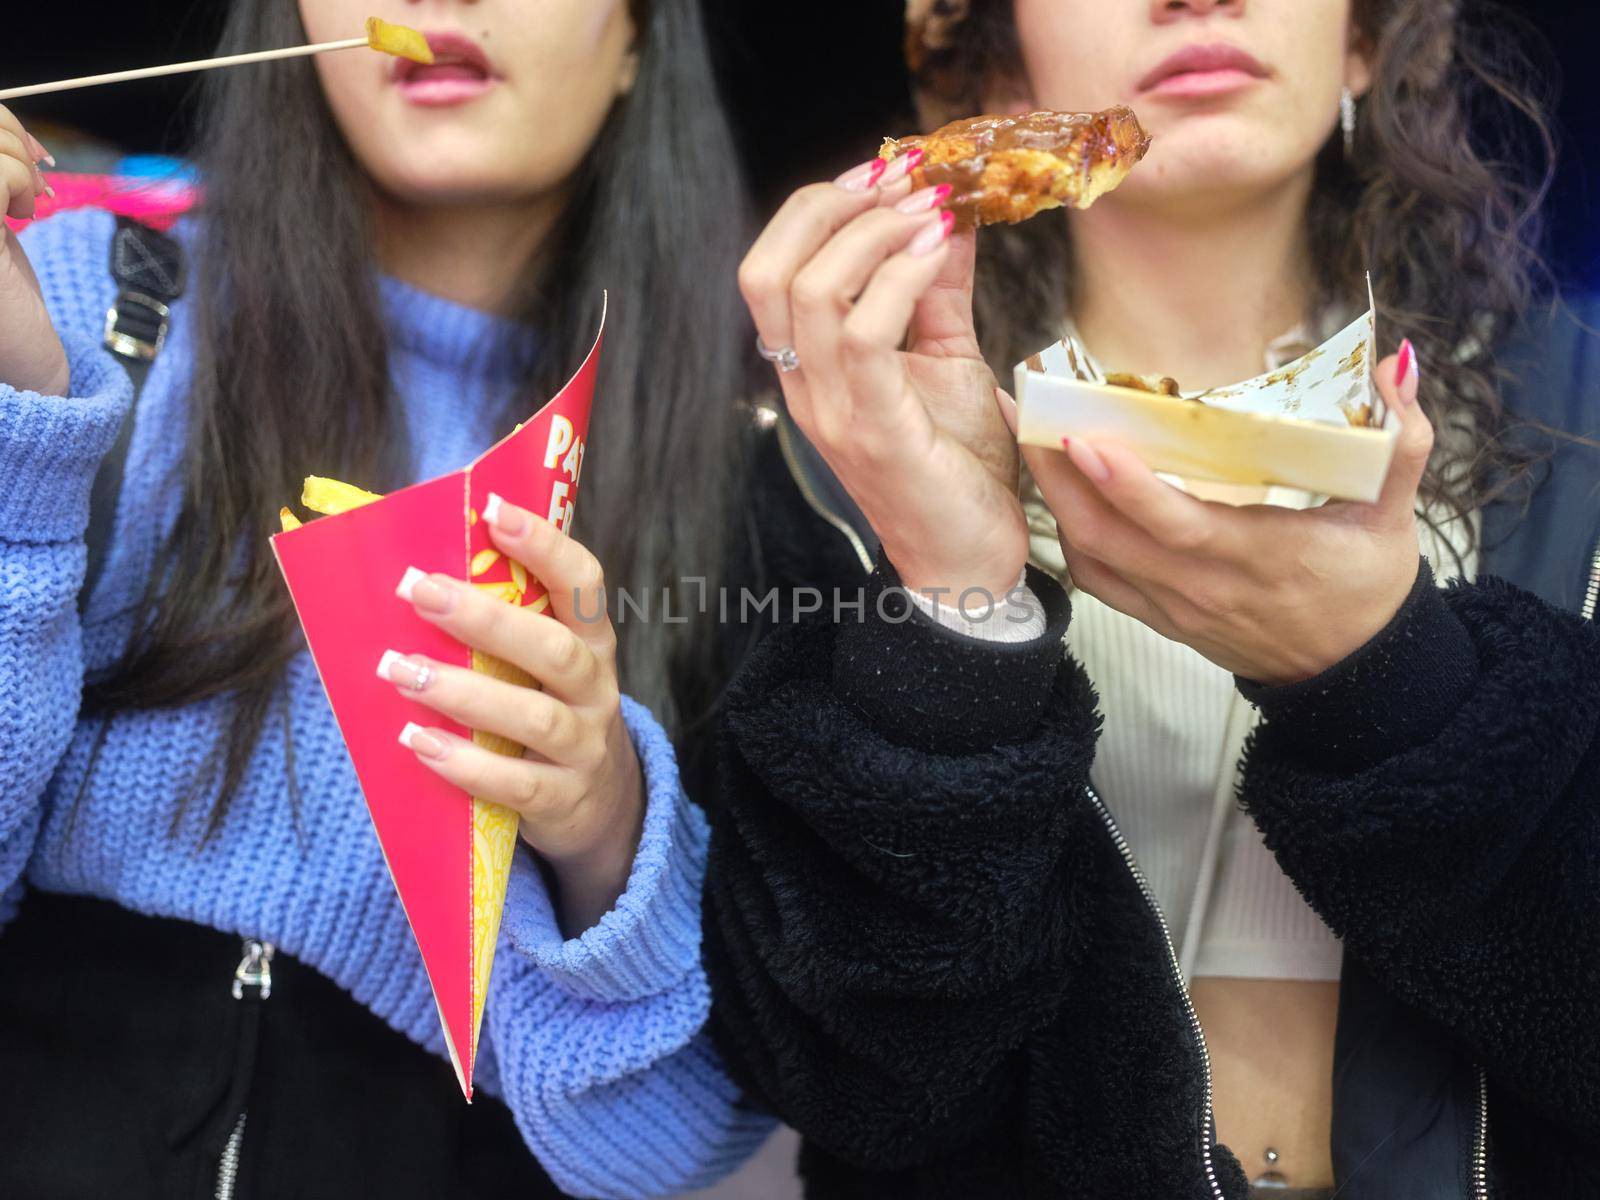 Cropped photo with close up view of two women eating fast food in a night fair